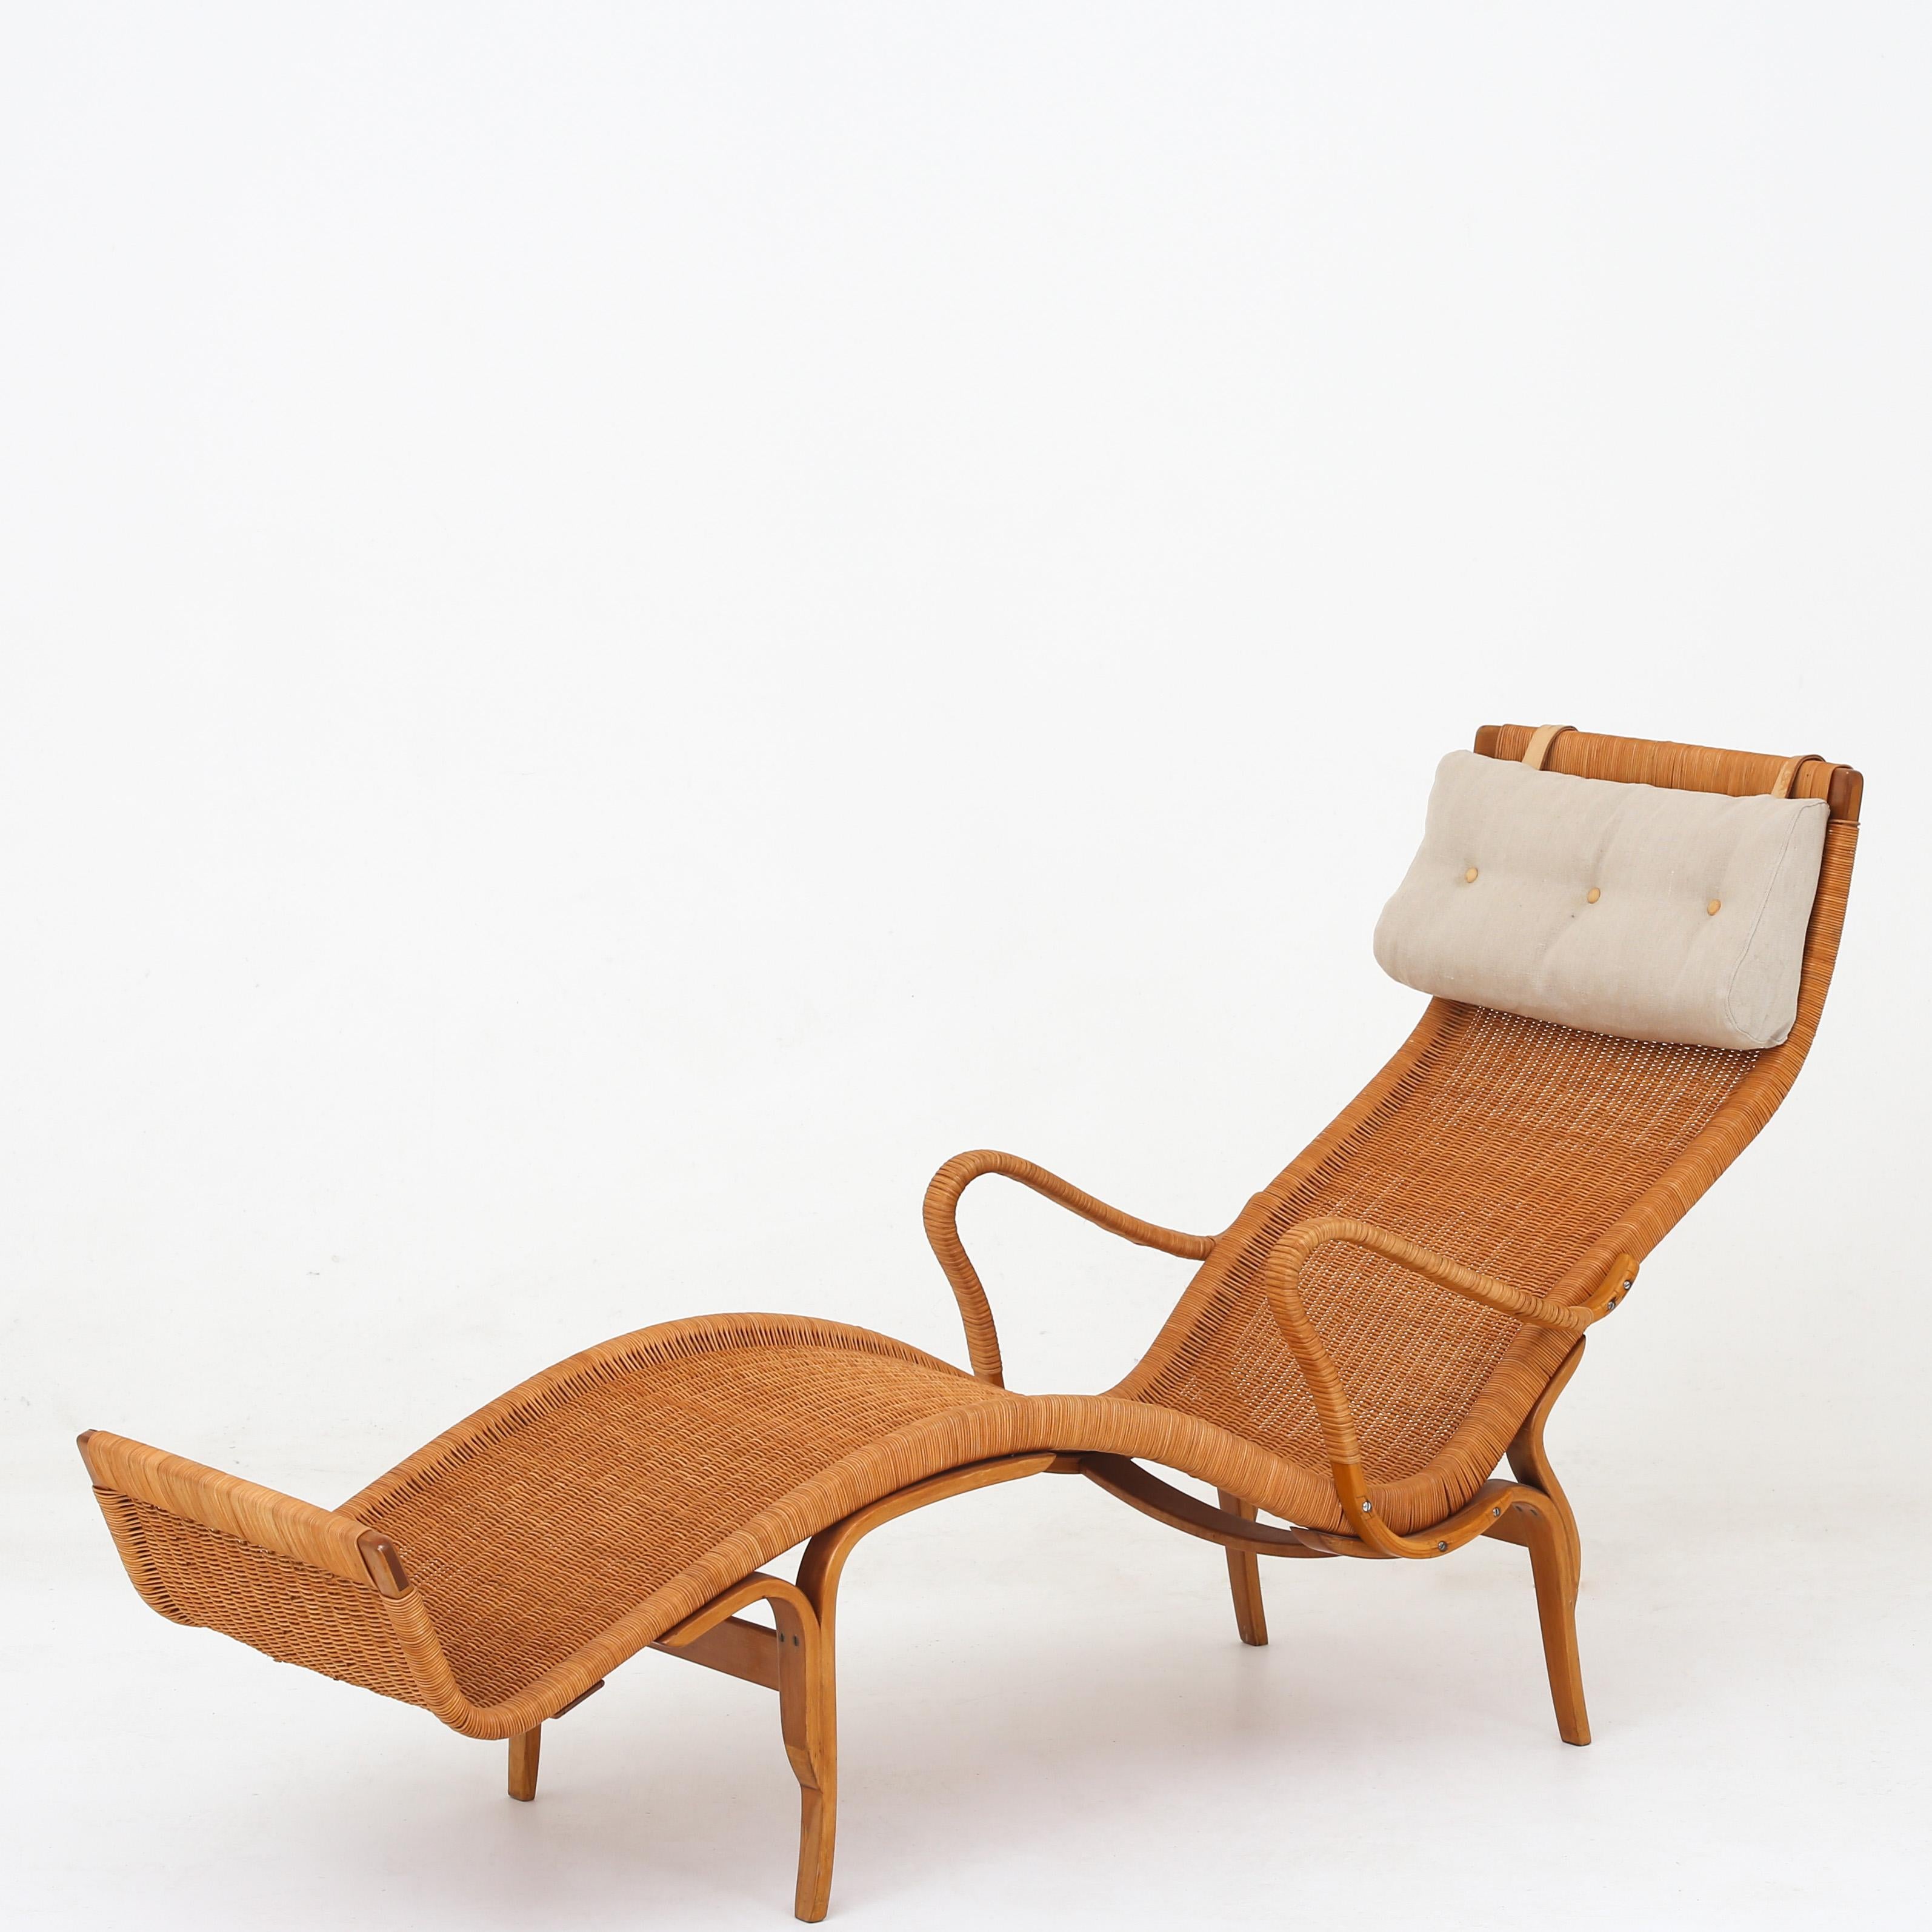 Cane Chaise Longues by Bruno Mathsson